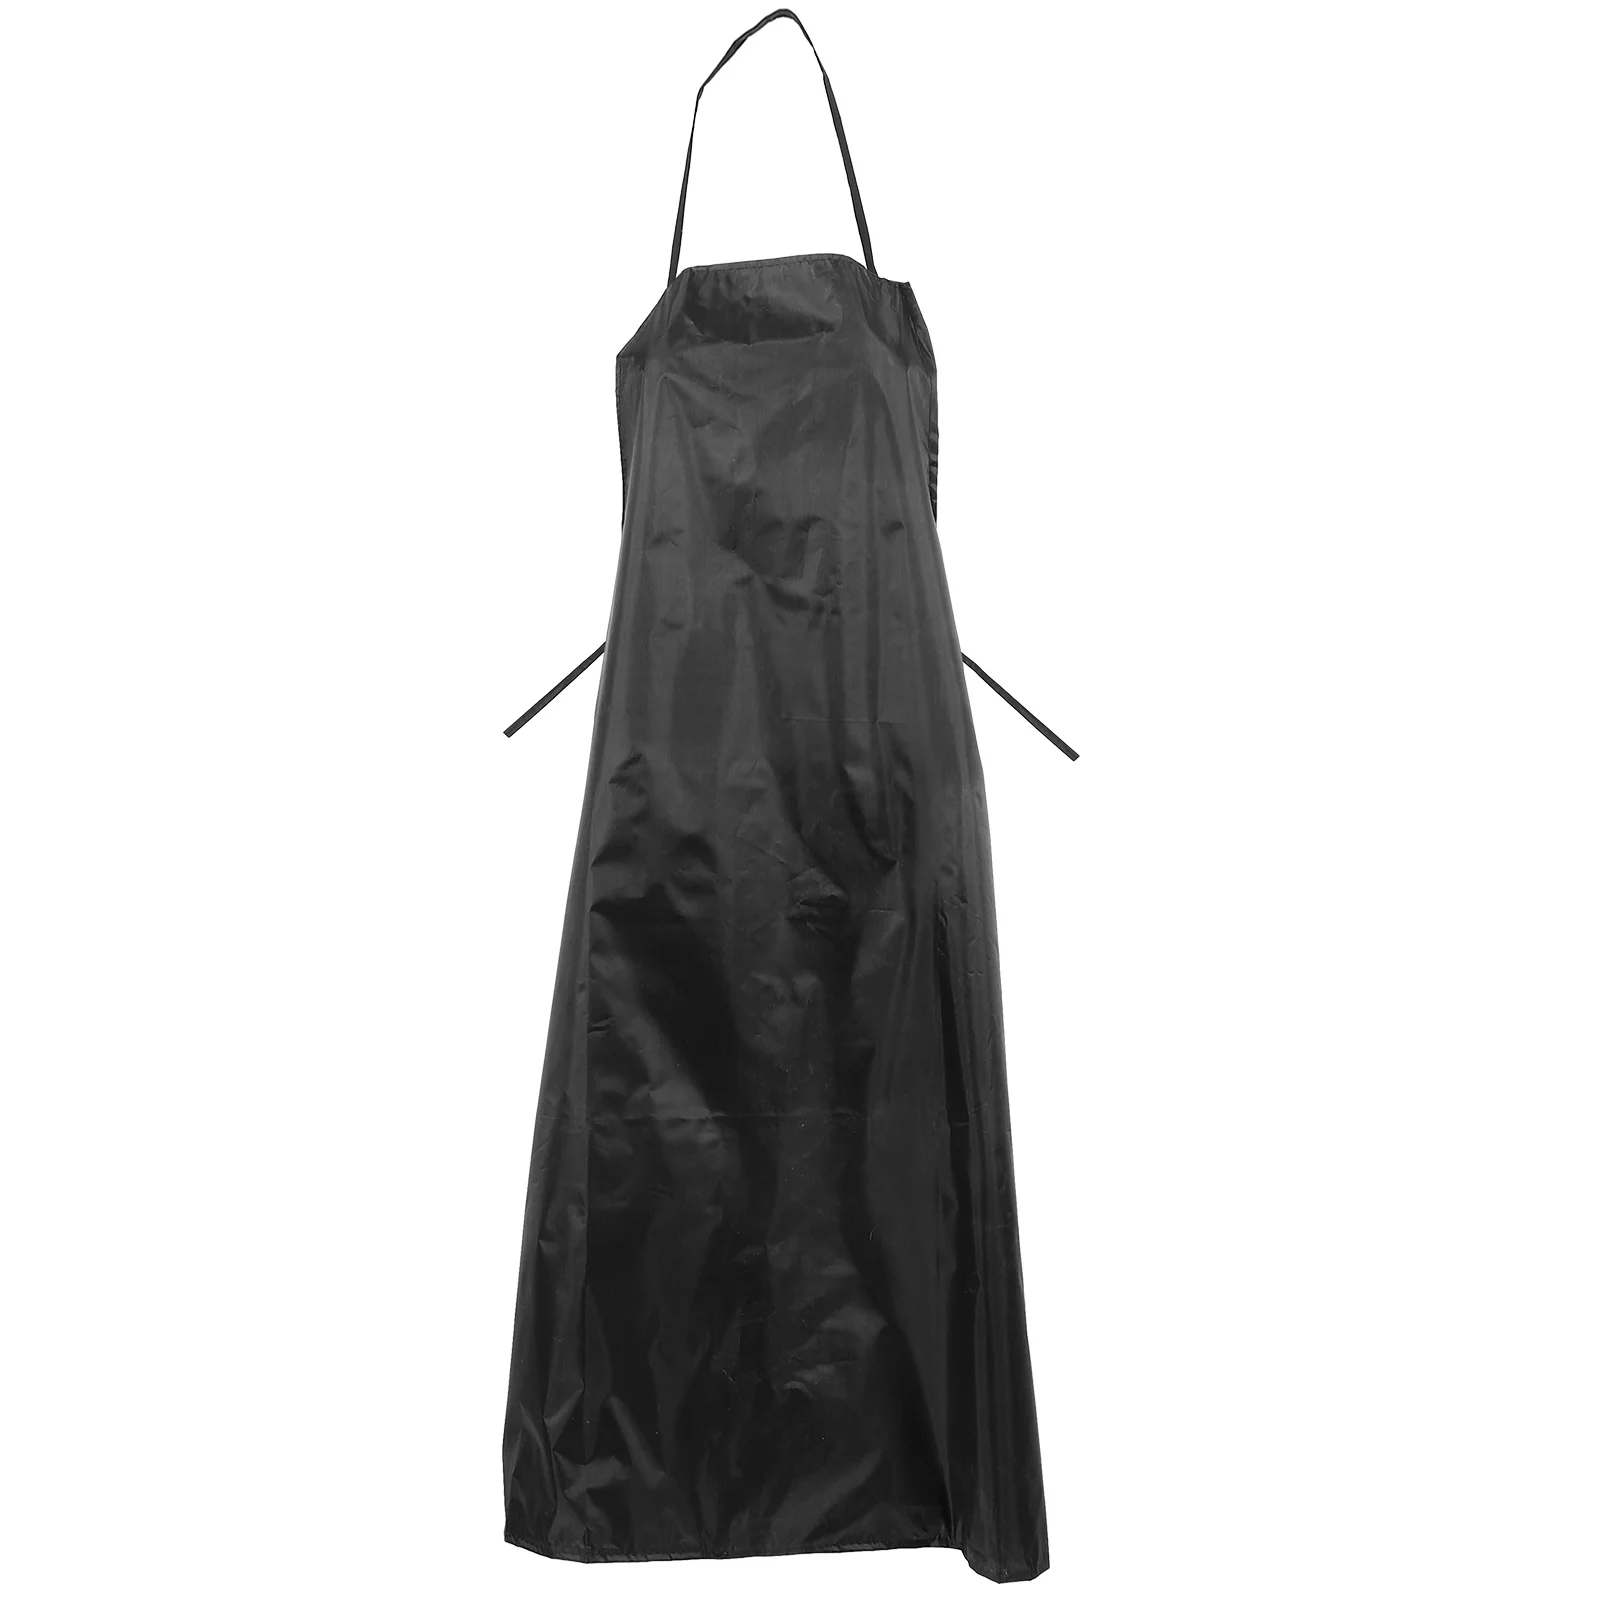 

Waterproof and Oilproof Apron Multifunction Aprons Dish Washing Polyester Taffeta Coated Fabric Work Cooking